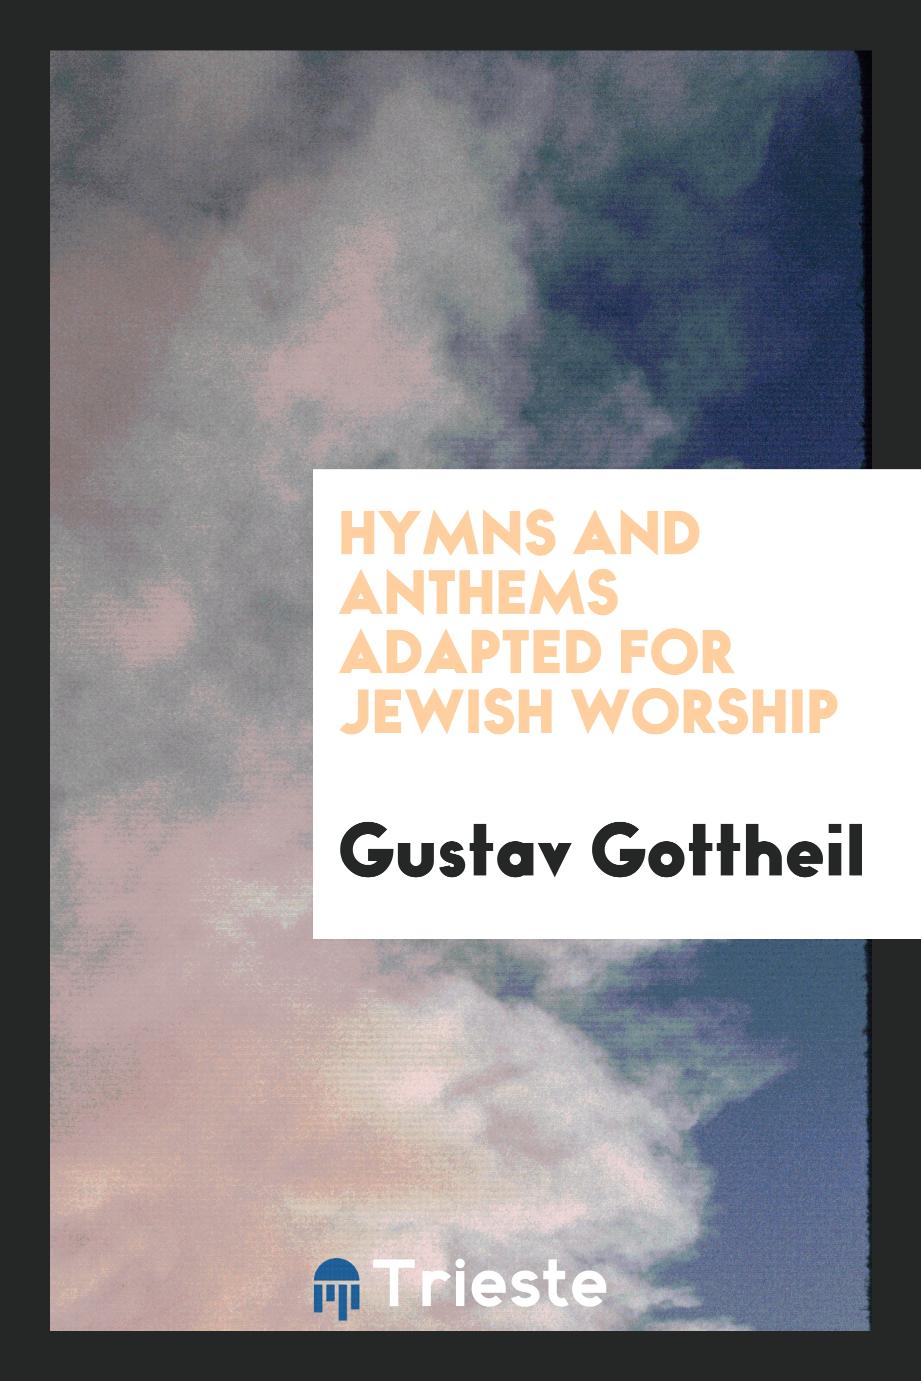 Hymns and anthems adapted for Jewish worship